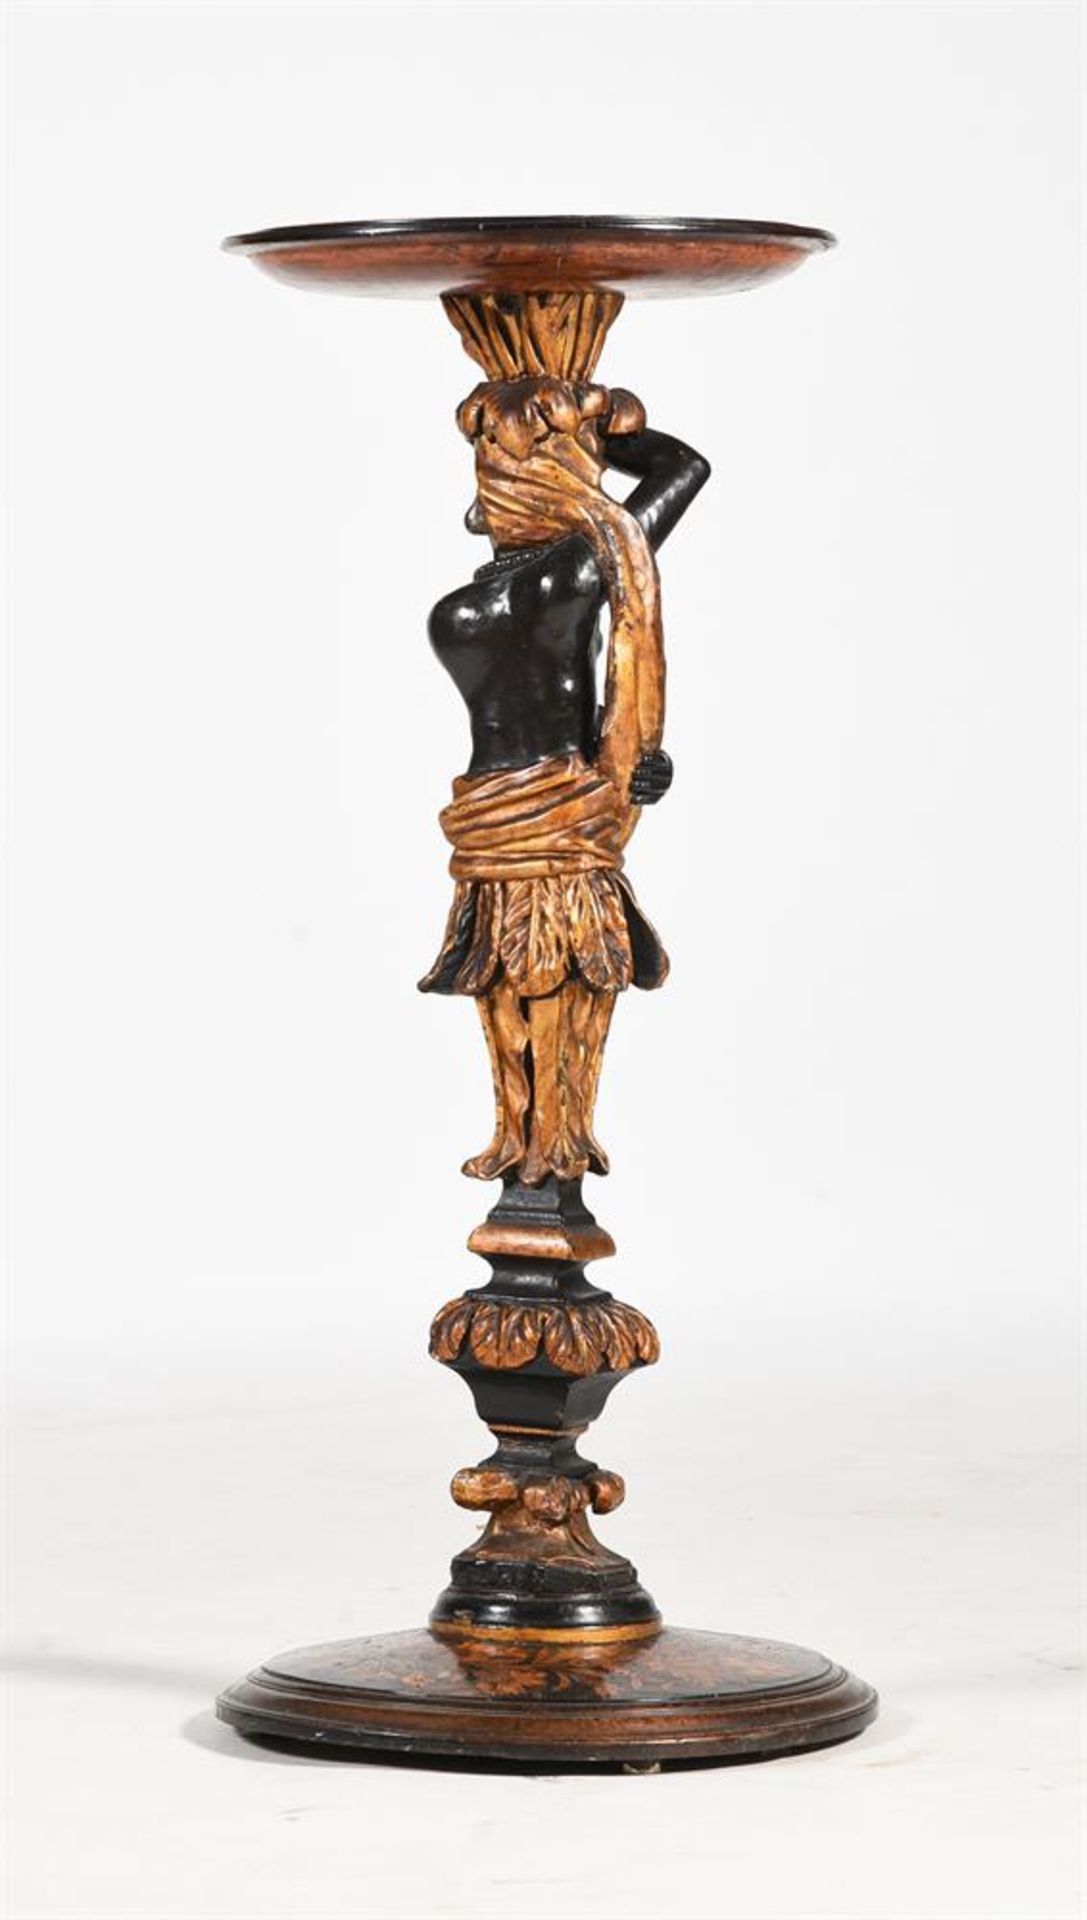 A CONTINENTAL GILTWOOD, EBONISED AND MARQUETRY 'BLACKAMOOR' MARBLE TOP STAND, LATE 17TH/18TH CENTURY - Image 5 of 5